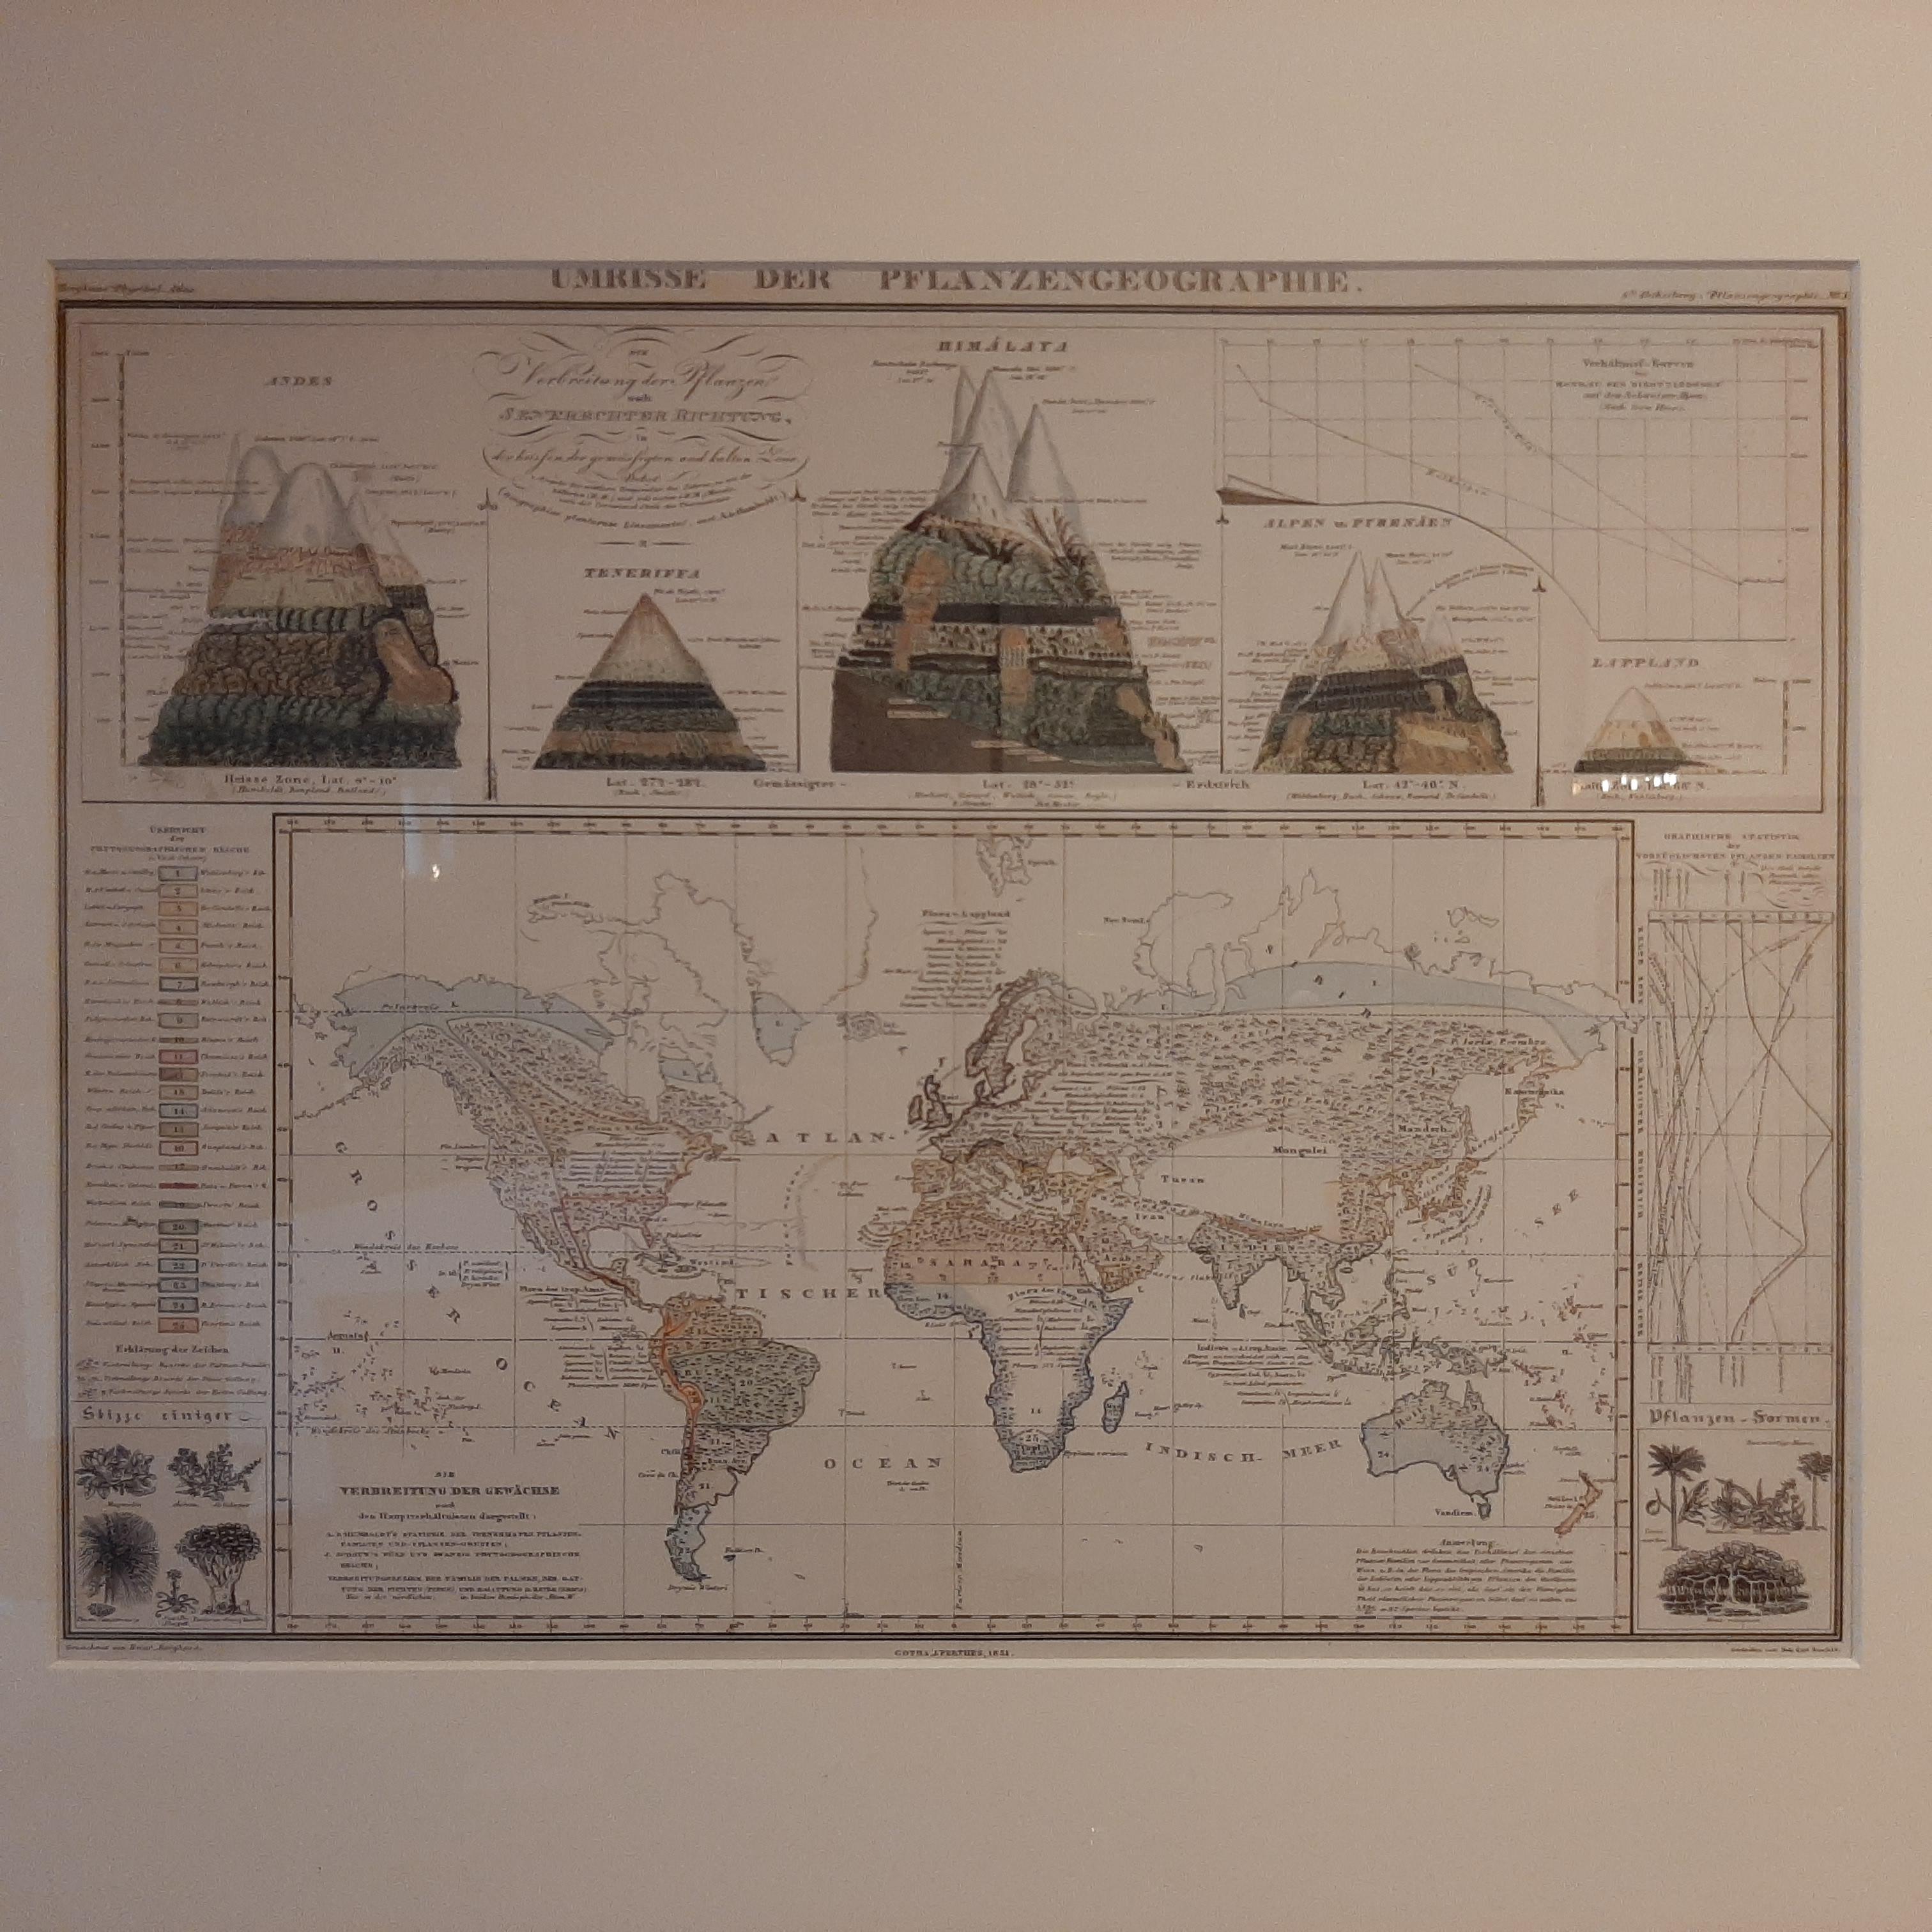 Antique map titled 'Umrisse der Pflanzengeographie'. Original antique map showing the distribution of vegetation throughout the world. Five drawings above the map show the vegetation in numerous areas including the Andes, Himalayas and the Alps.